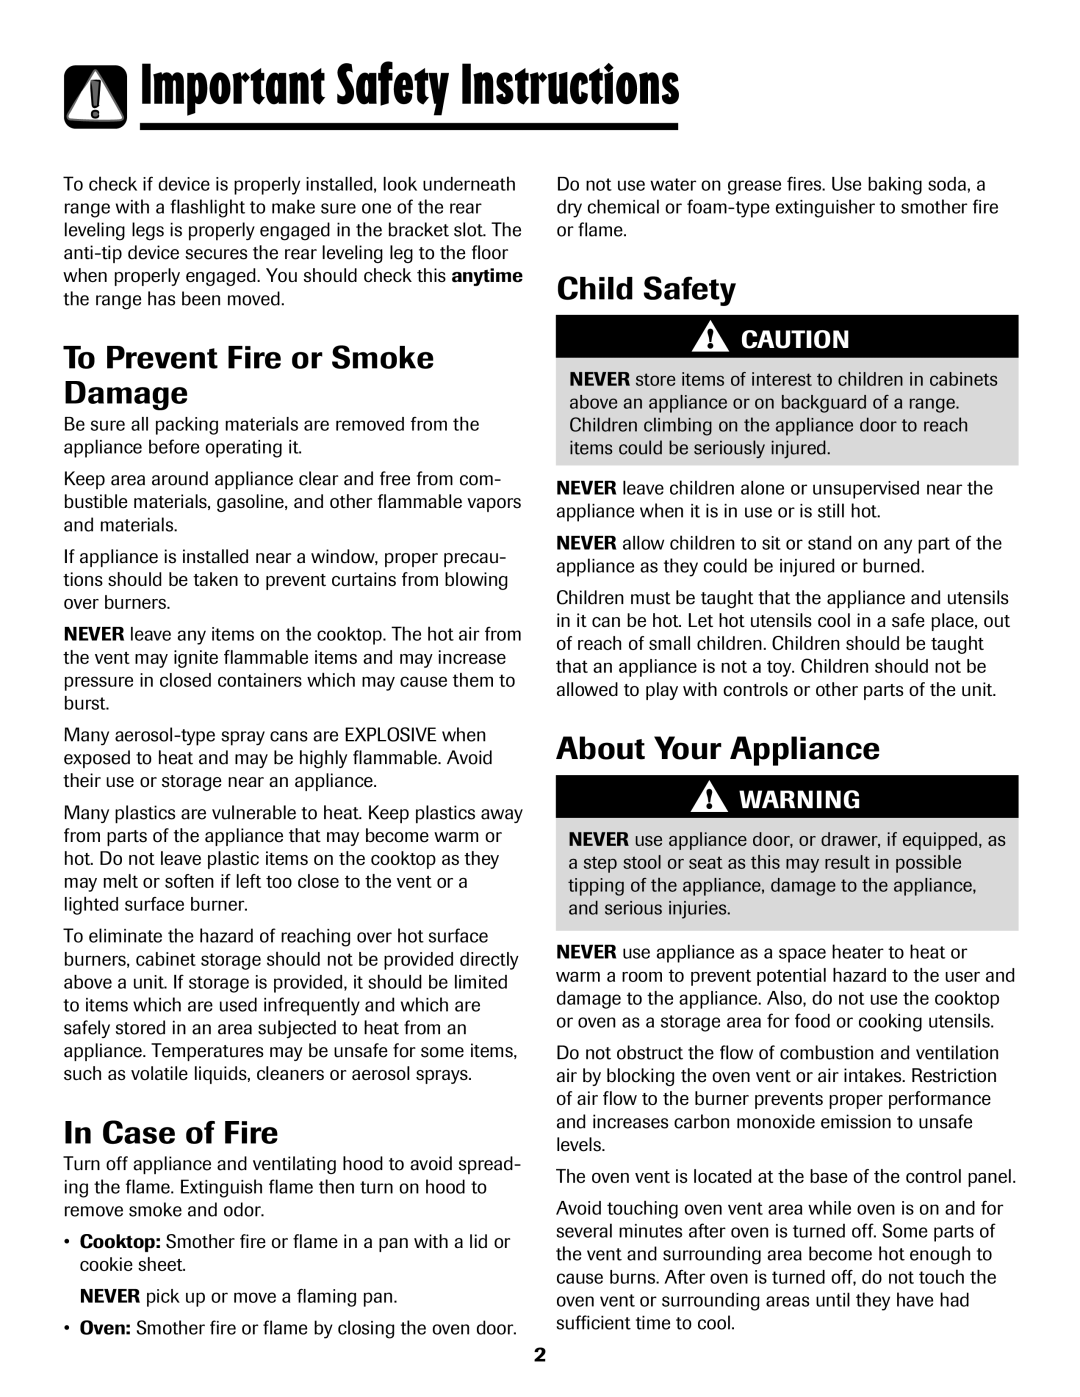 Maytag 8113P424-60 manual Important Safety Instructions, To Prevent Fire or Smoke Damage, In Case of Fire, Child Safety 